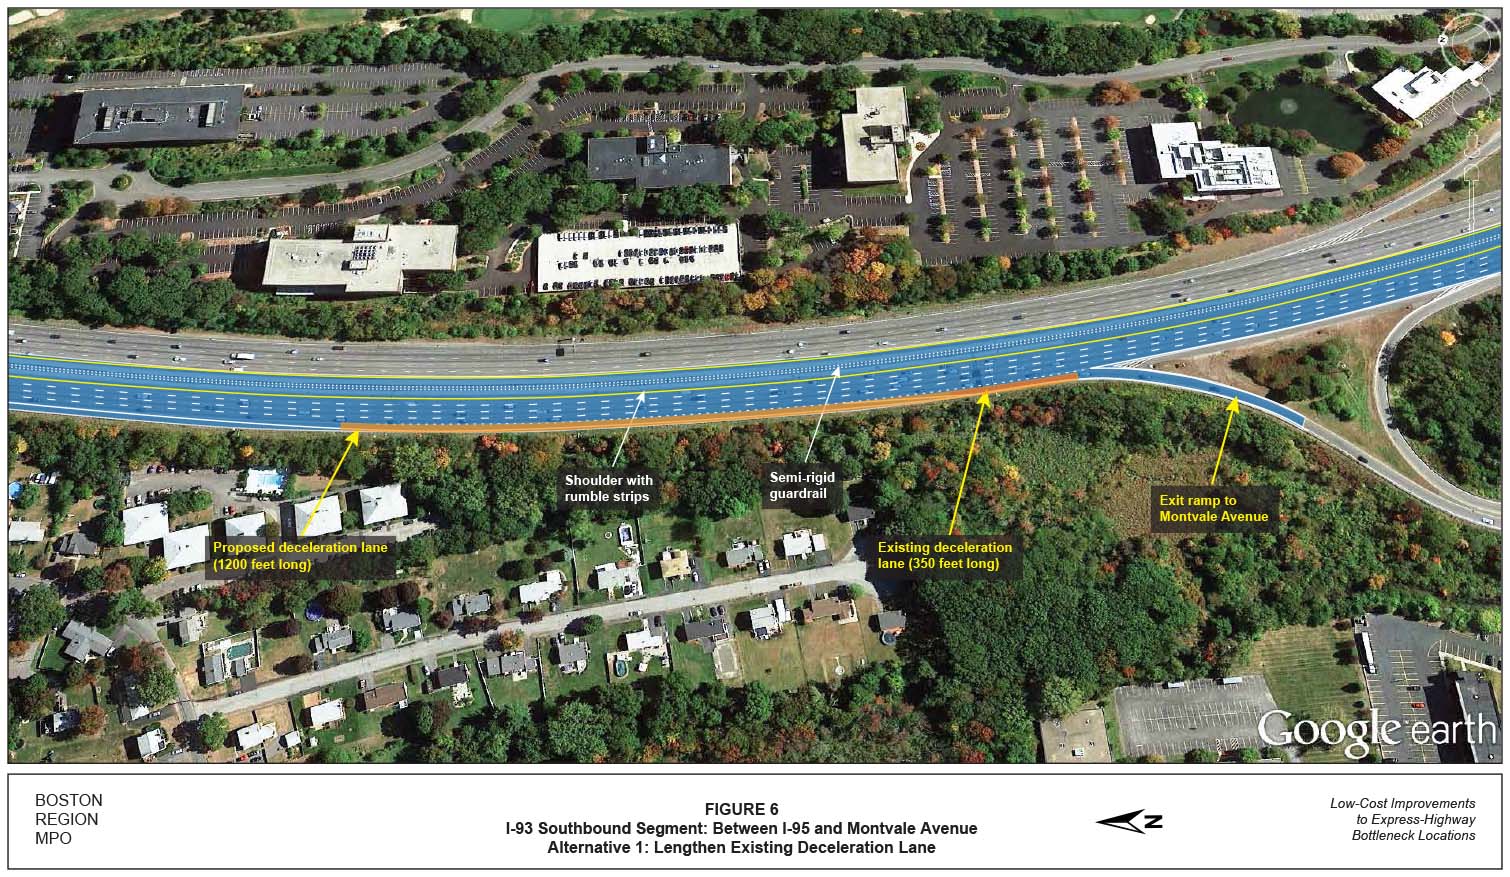 FIGURE 6. Aerial-view map showing “Improvement Alternative 1,” which recommends lengthening the existing deceleration lane on the I-93 southbound segment between I-95 and Montvale Avenue